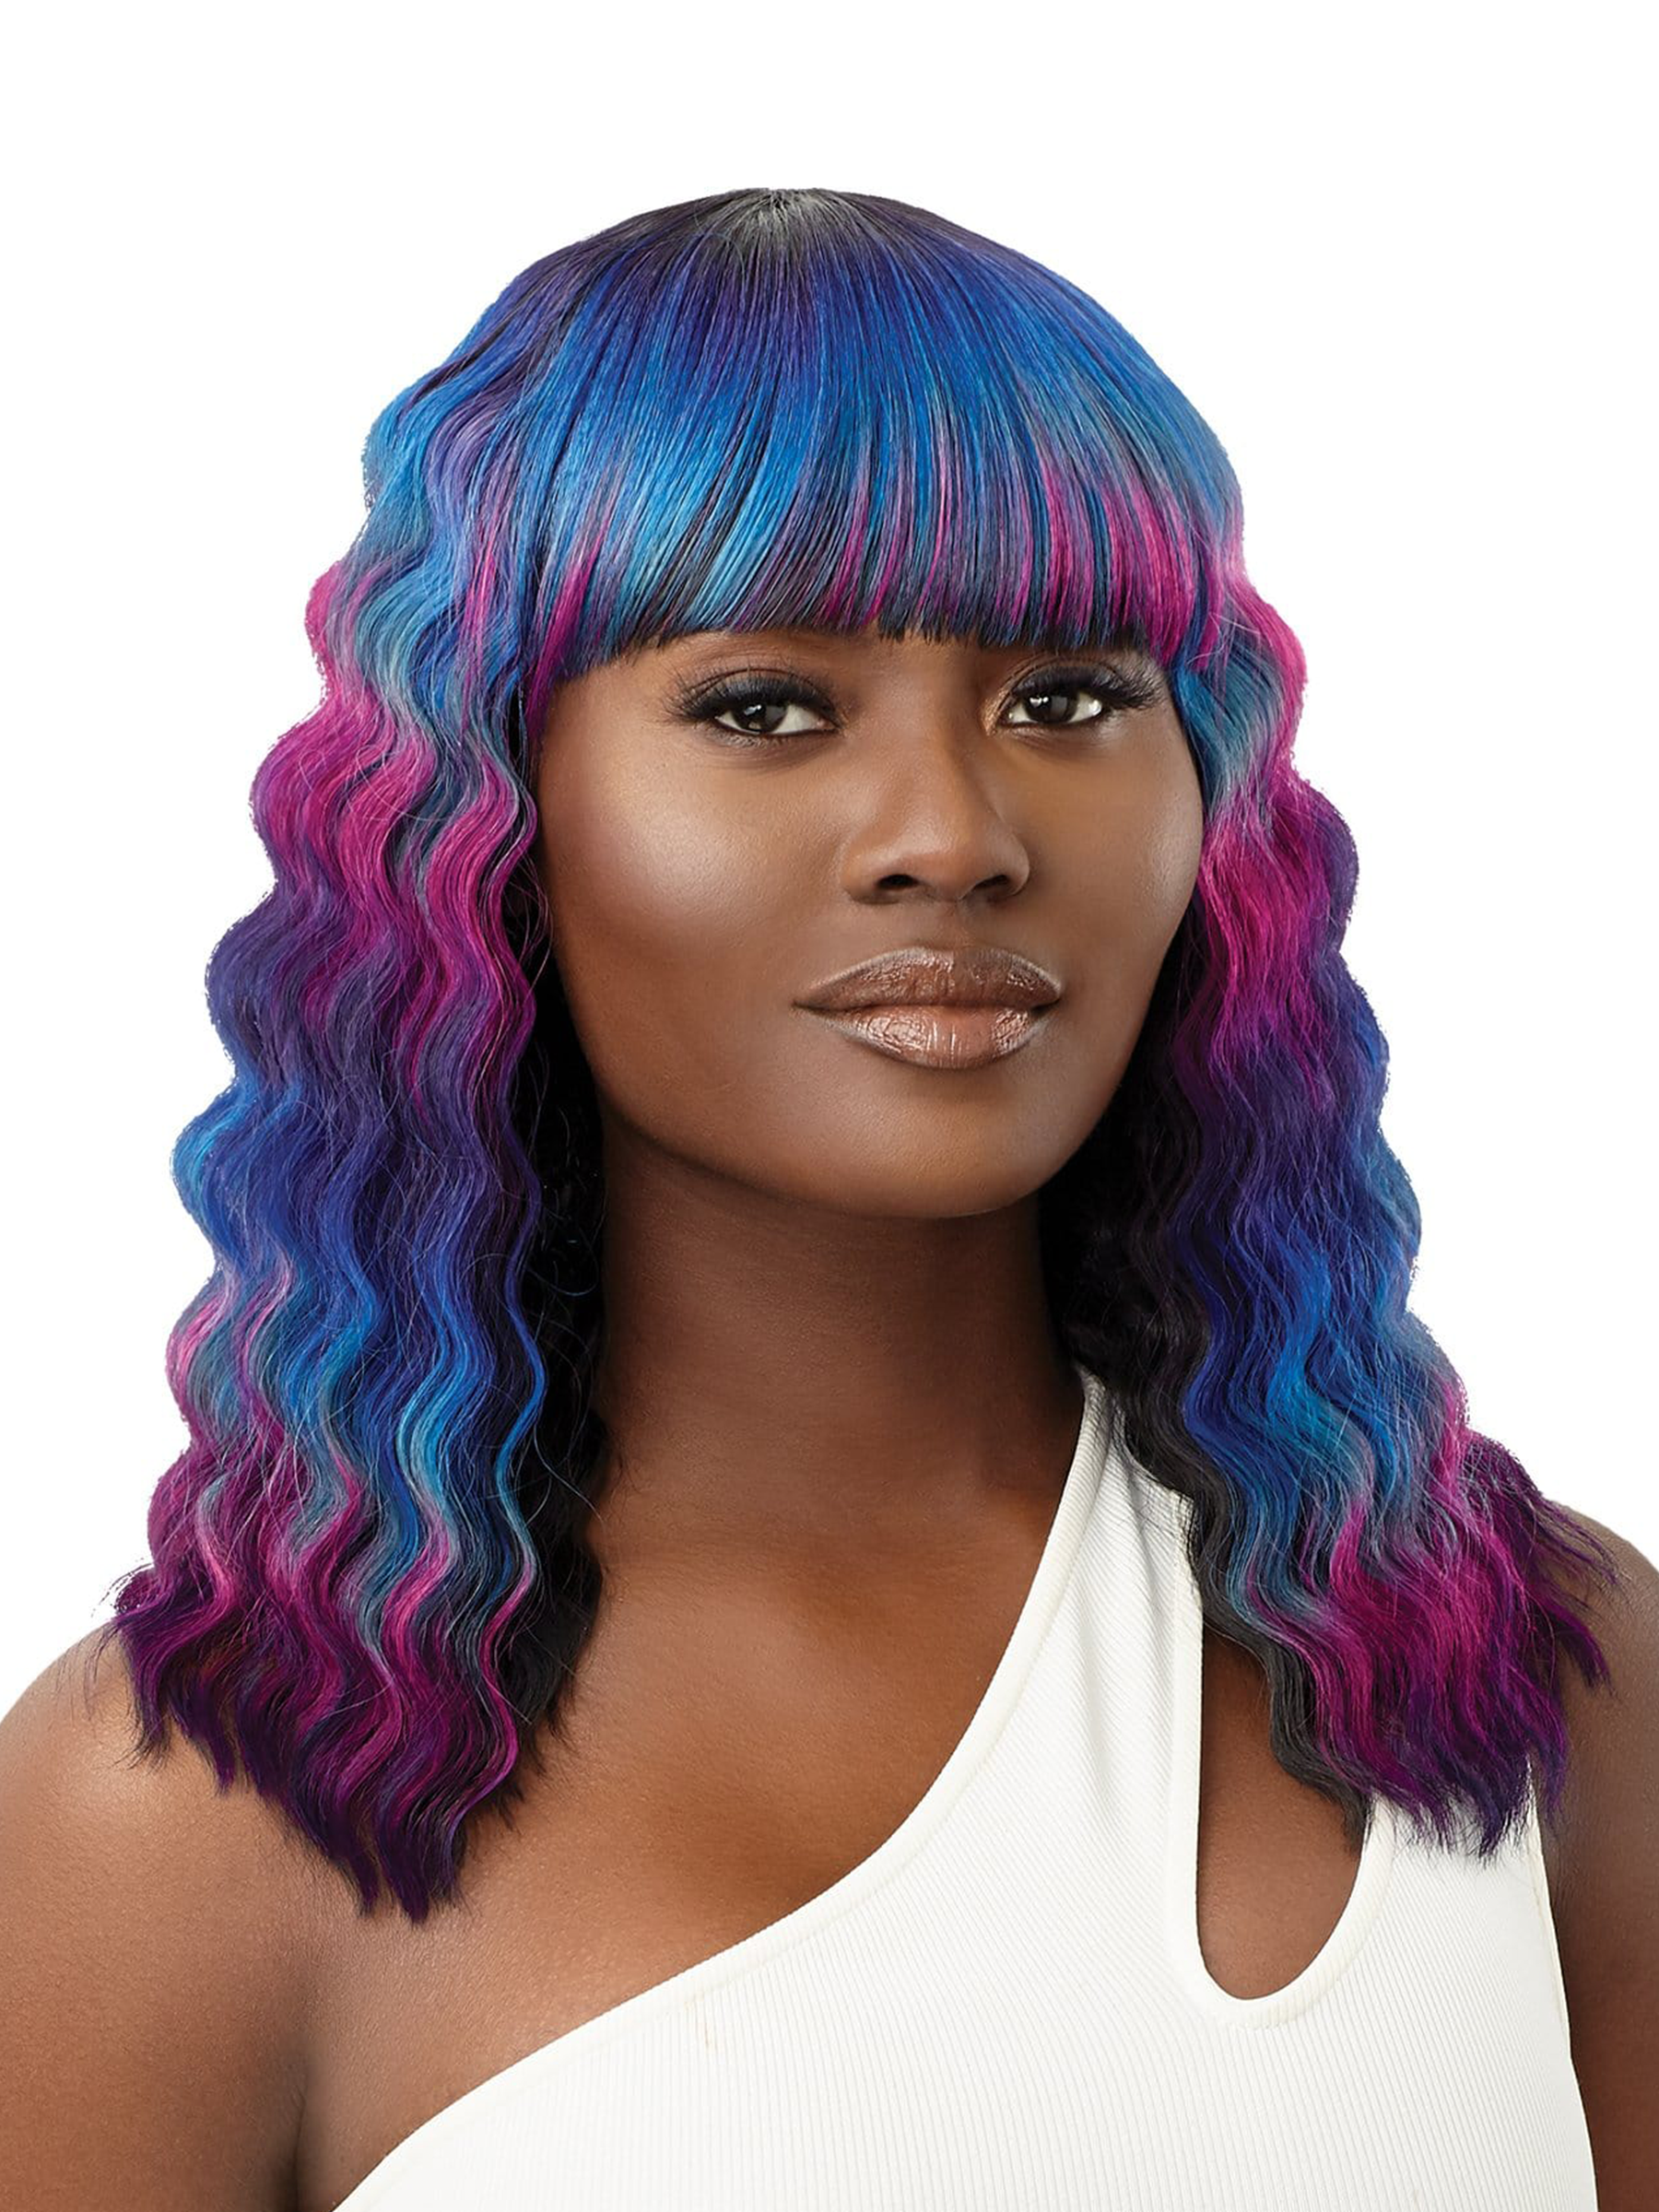 Outre Wigpop Color Play Synthetic Wig Scorpio